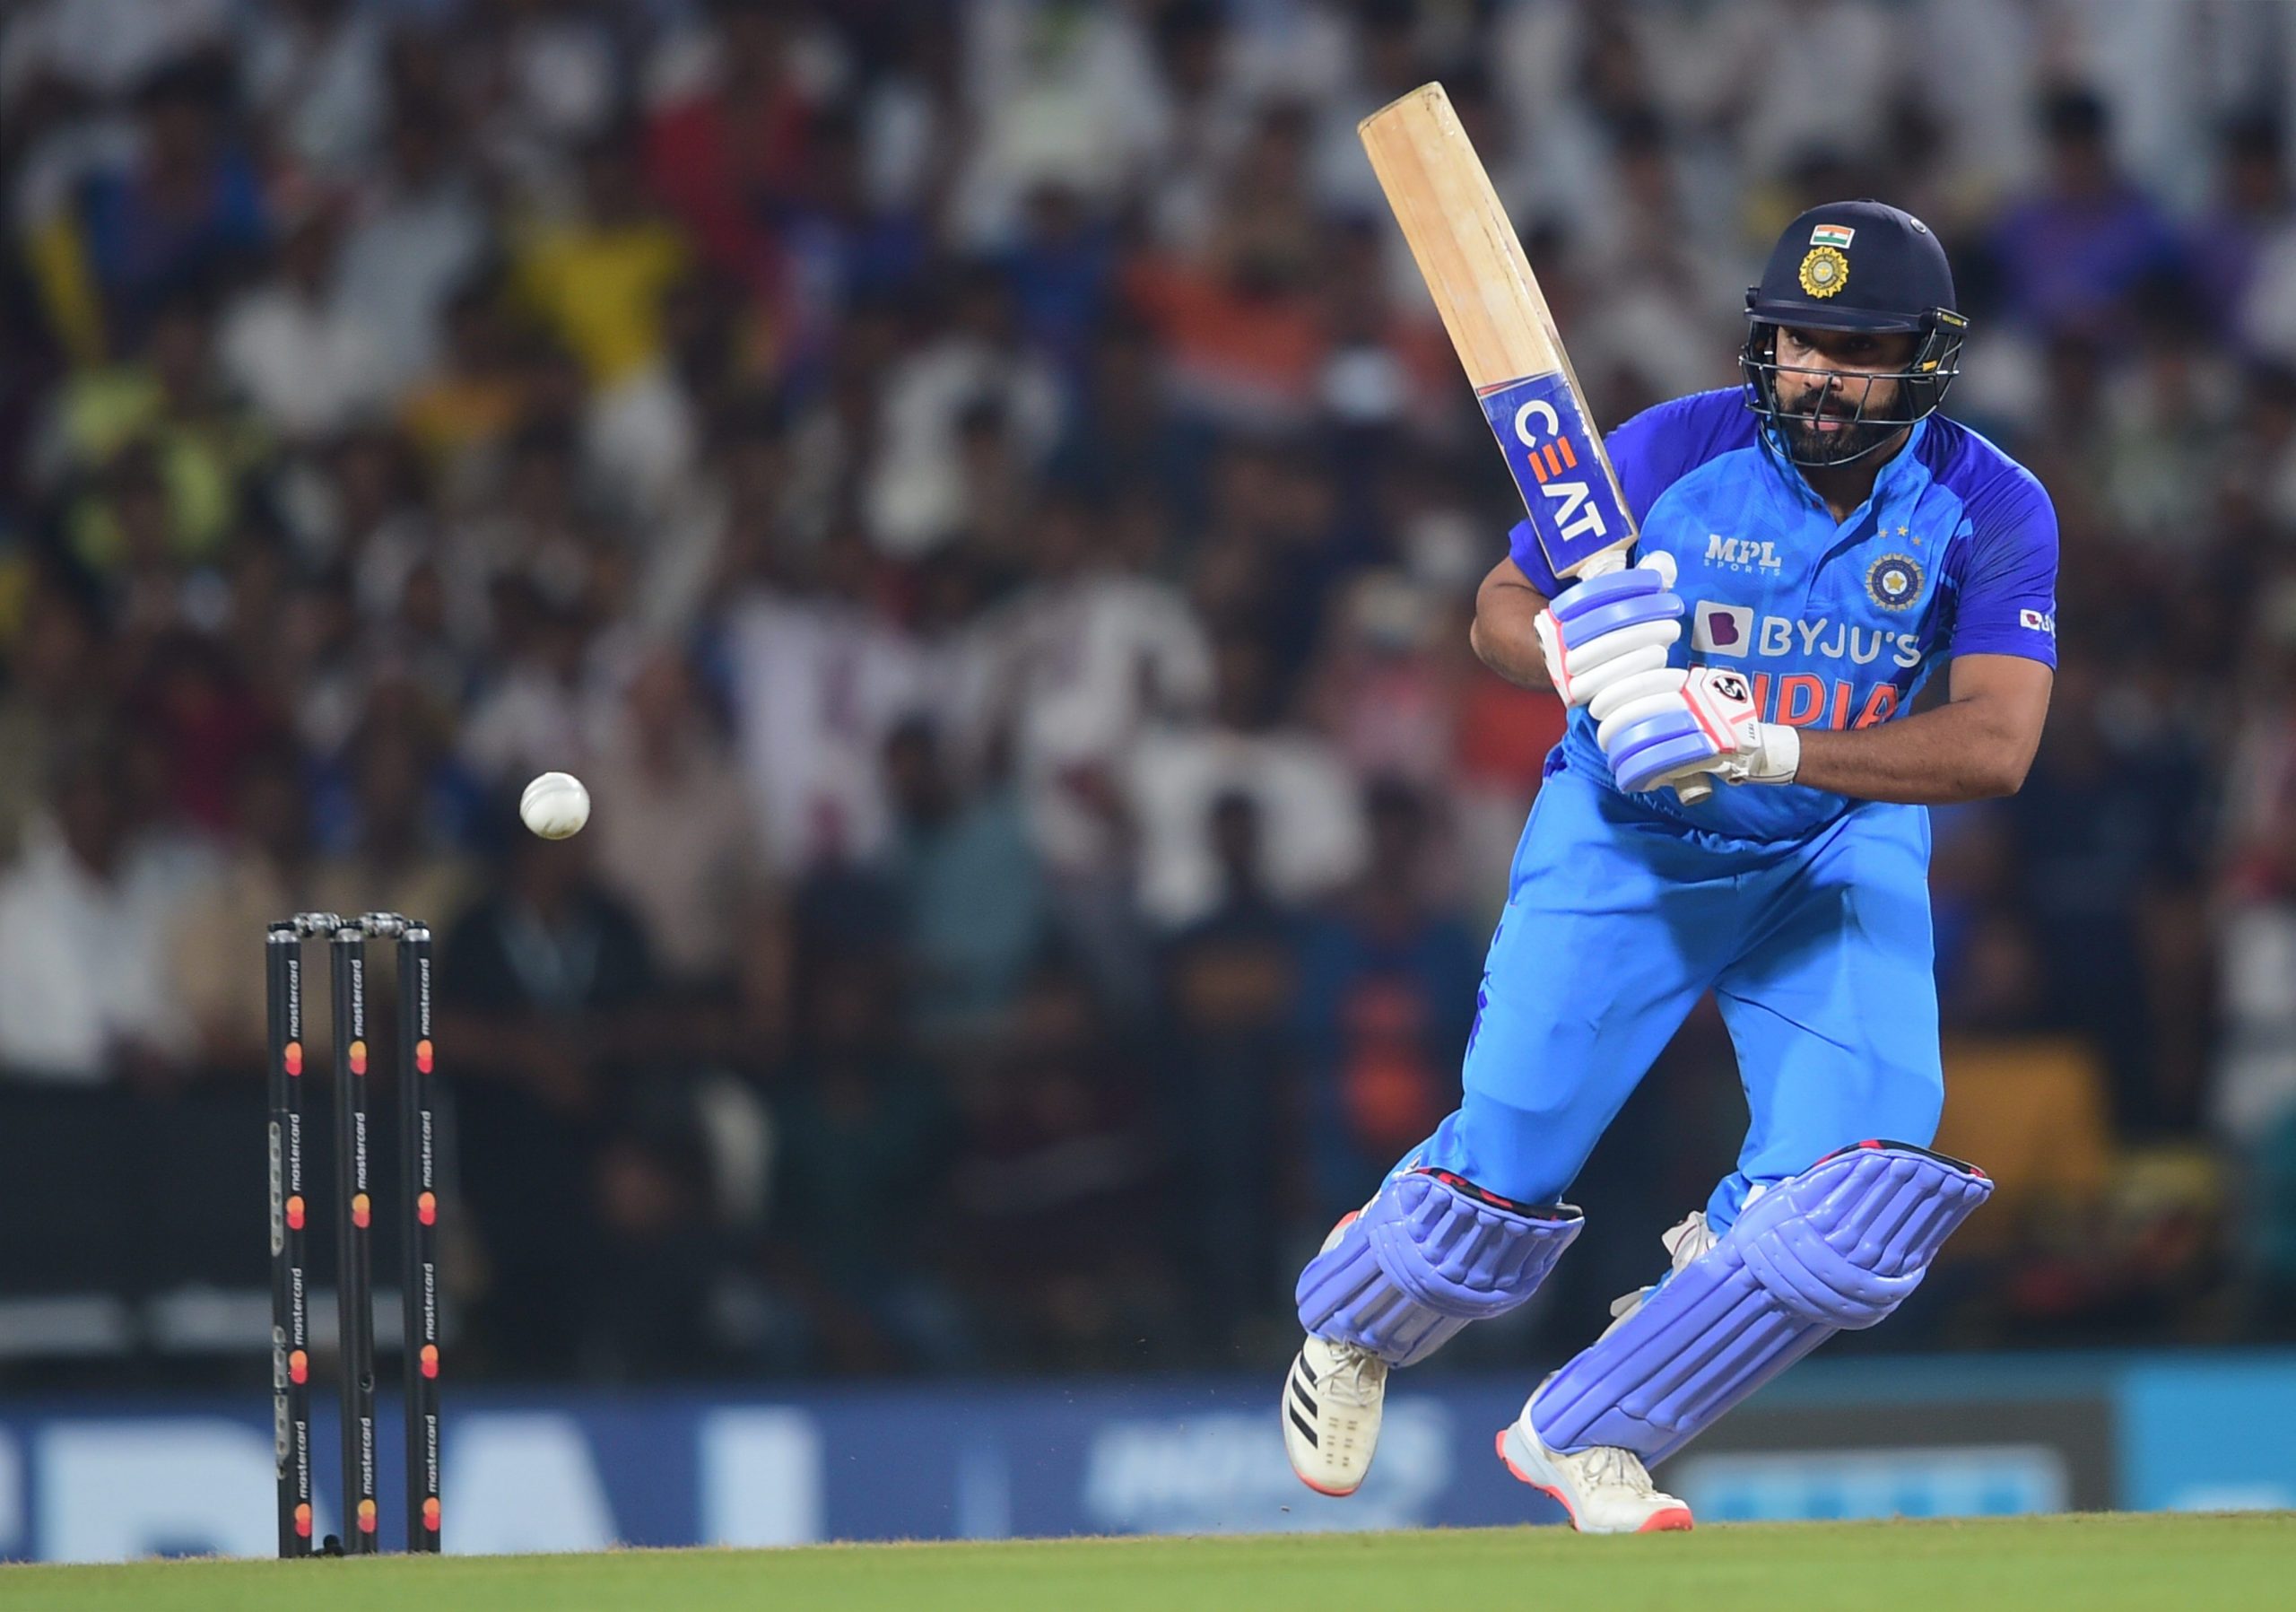 India vs Australia T20 World Cup warm up: Rohit Sharma gets out for 15, fans slam India skipper